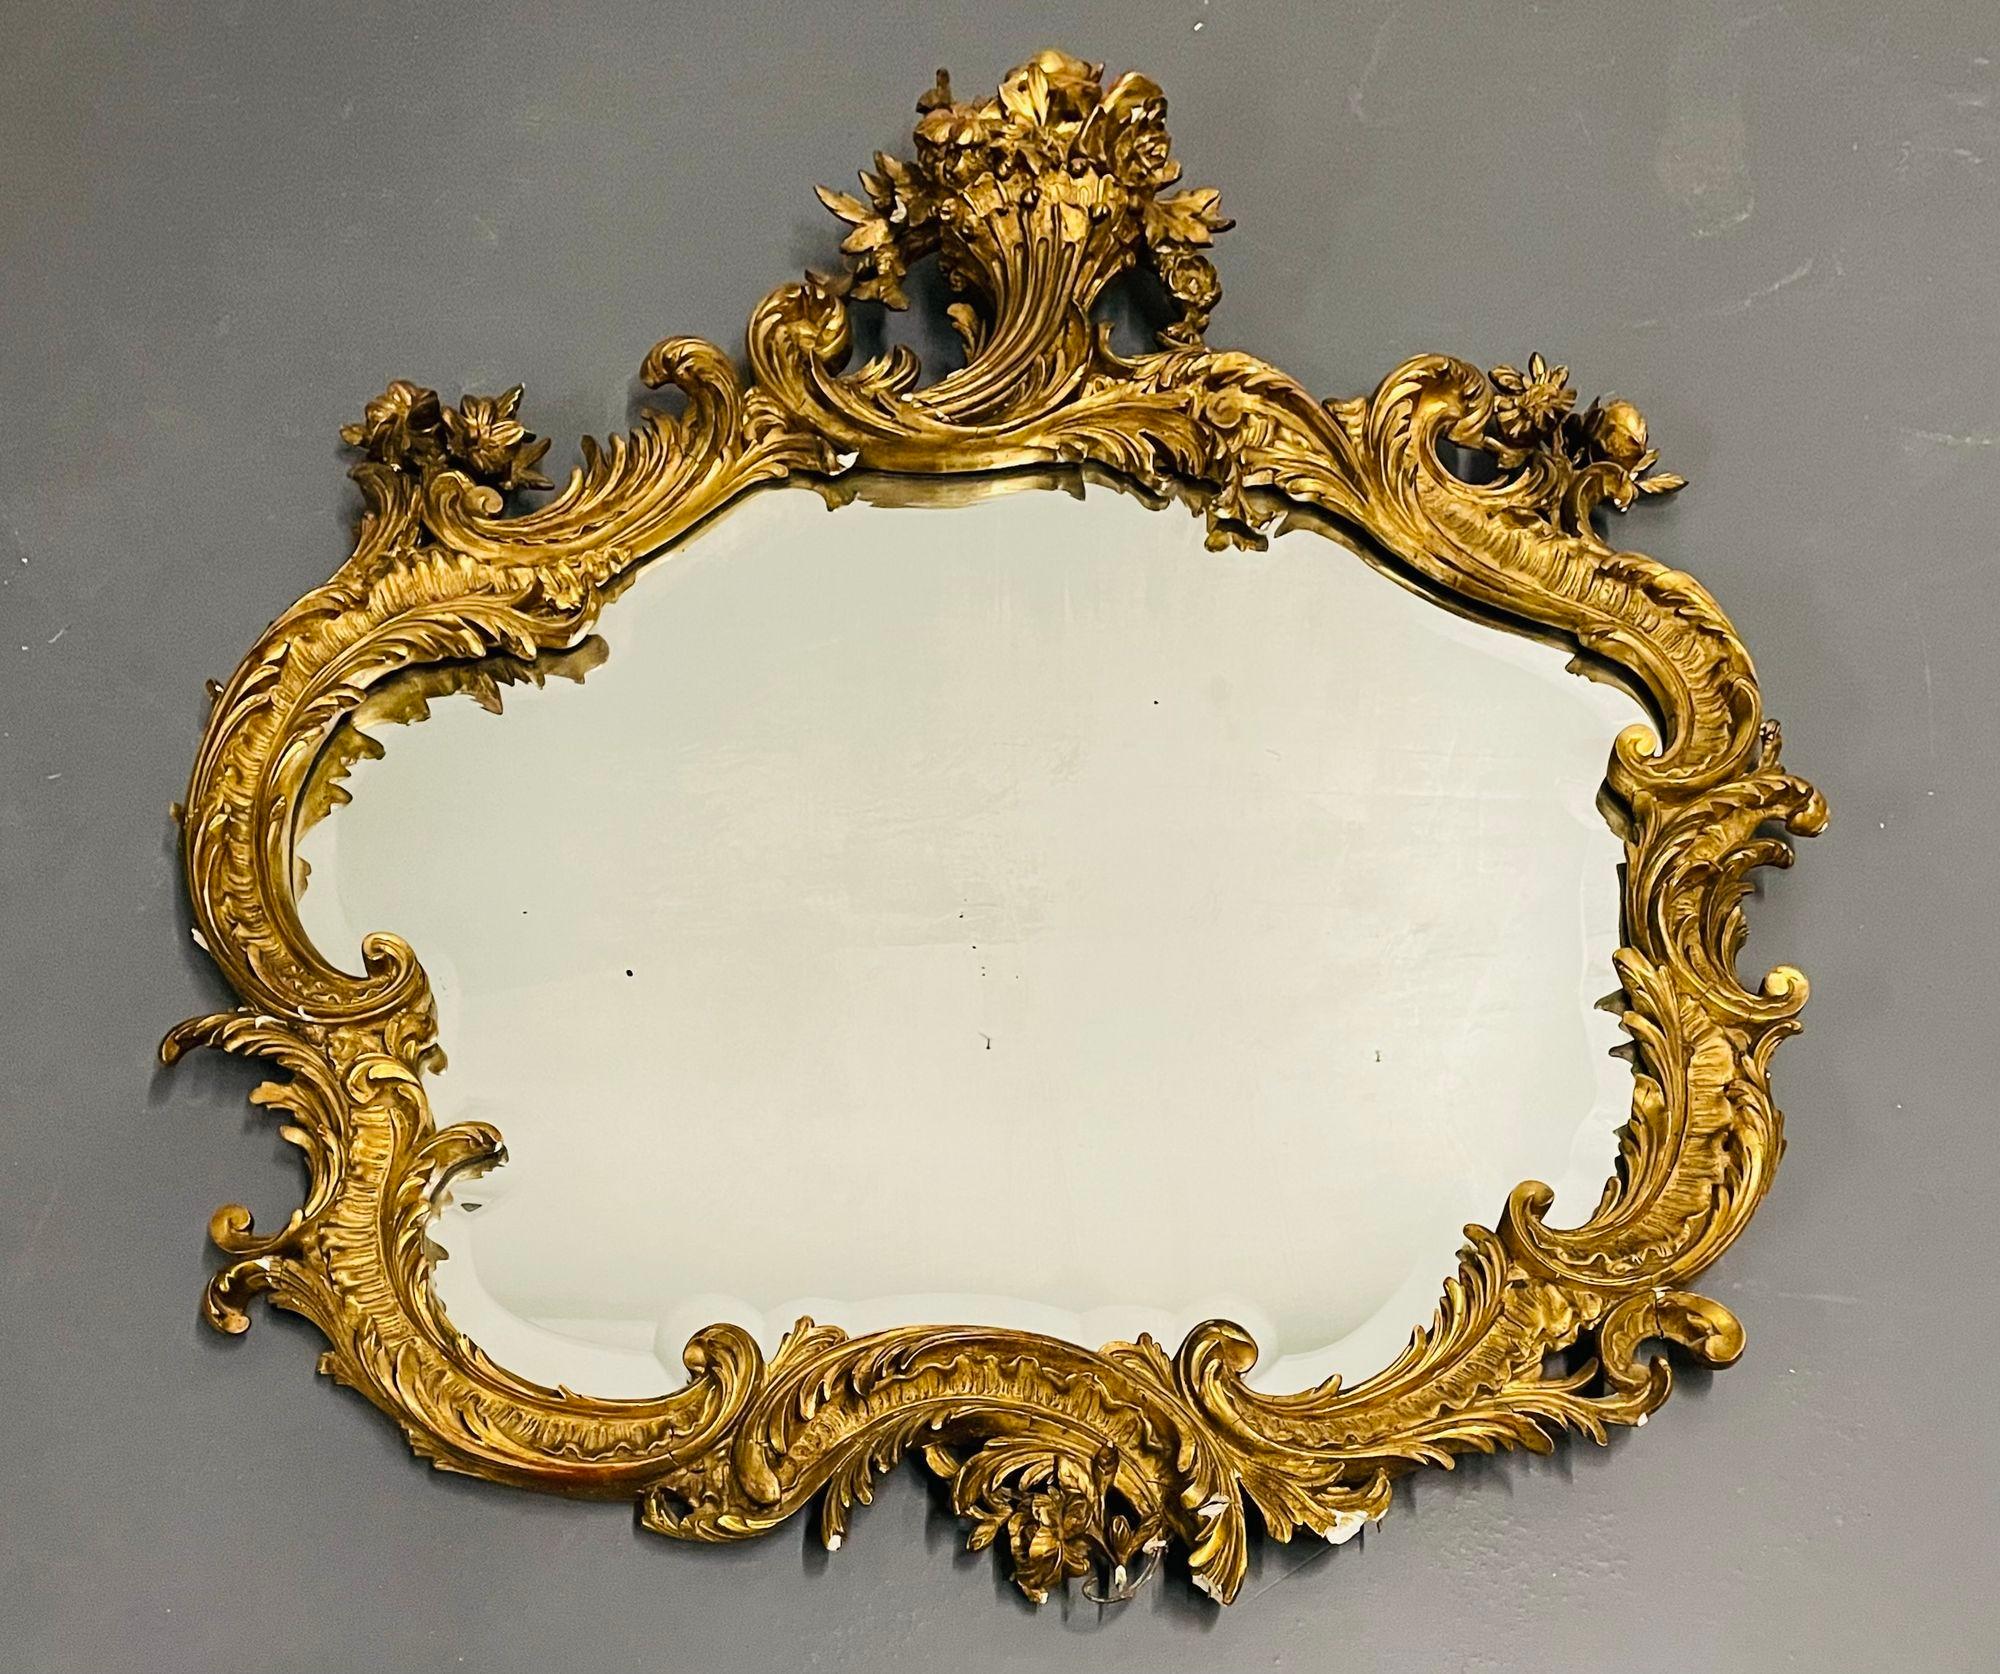 19th or 20th century giltwood French mirror, wall or console, floral decorated
A stunning floral basket gilt gesso wall or console mirror having a thick beveled mirror framed in a gilt wood and gesso scroll, floral, basket and leaf design frame. In